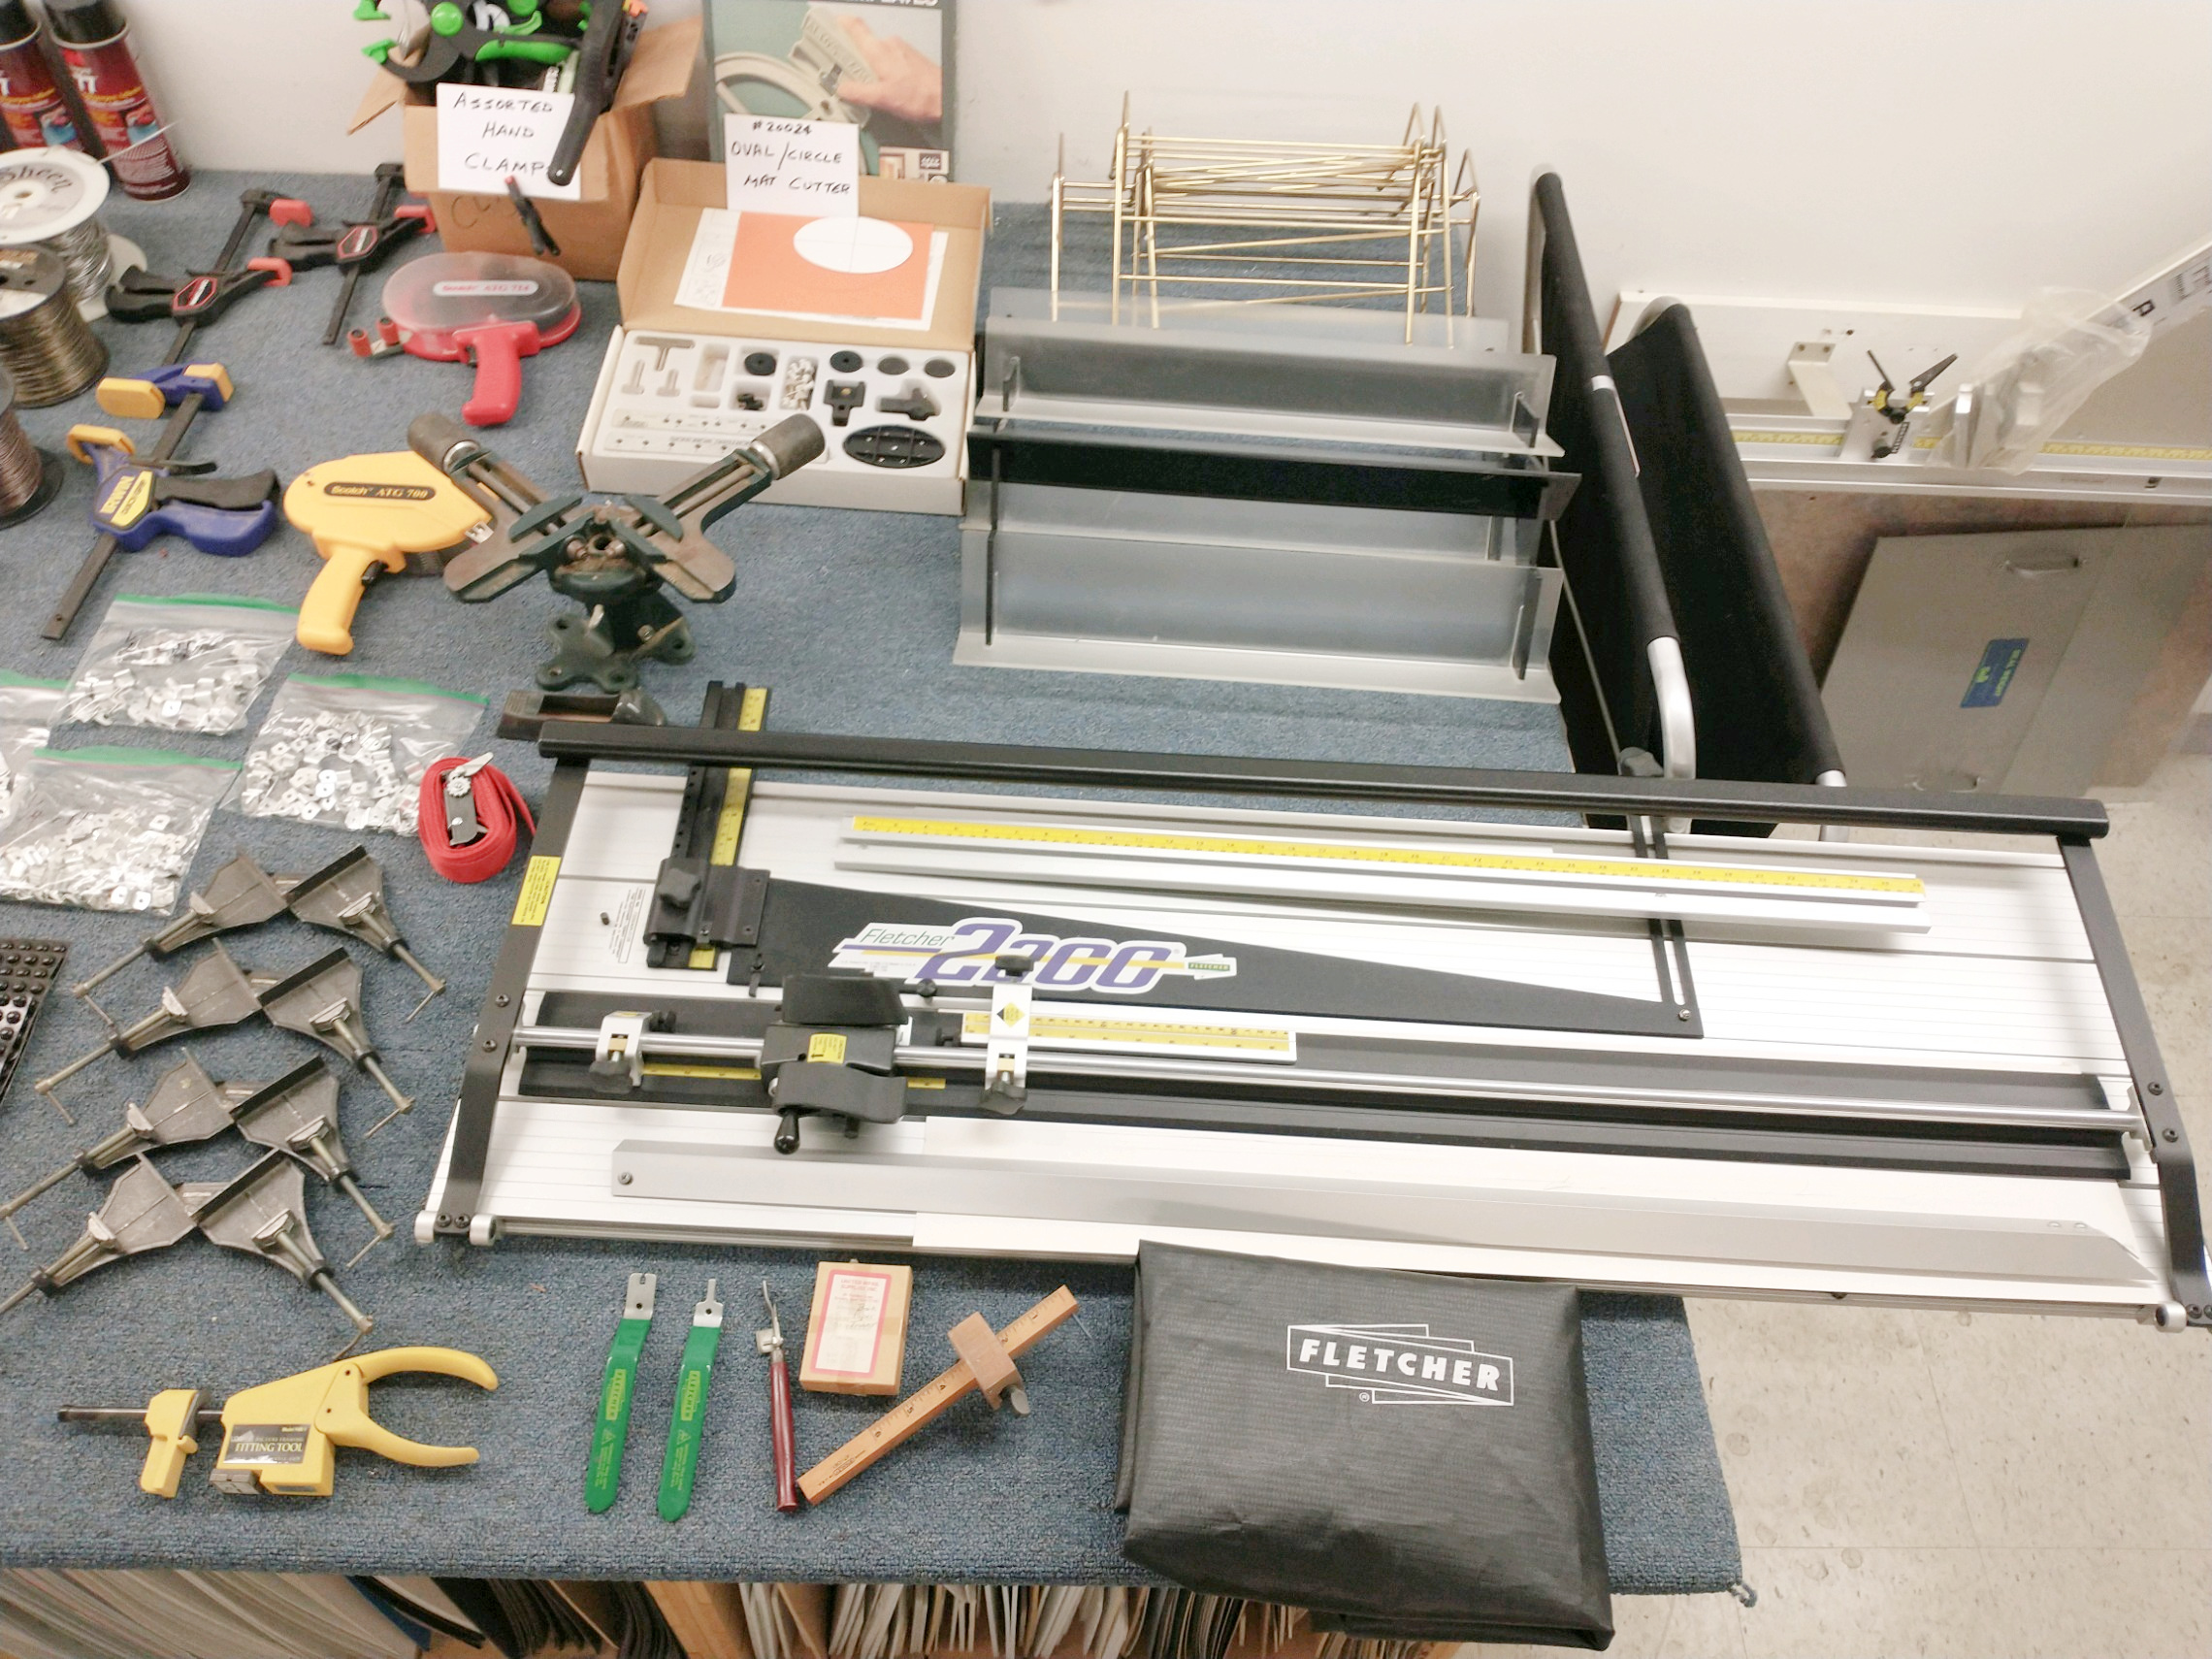 Equipment Lot: Inmes Model I-30 Chop Saw, Inmes Model IM-4P Joiner, Eclipse Mat Cutter & Supplies (Used) Item # UE-100621B (Tennessee)